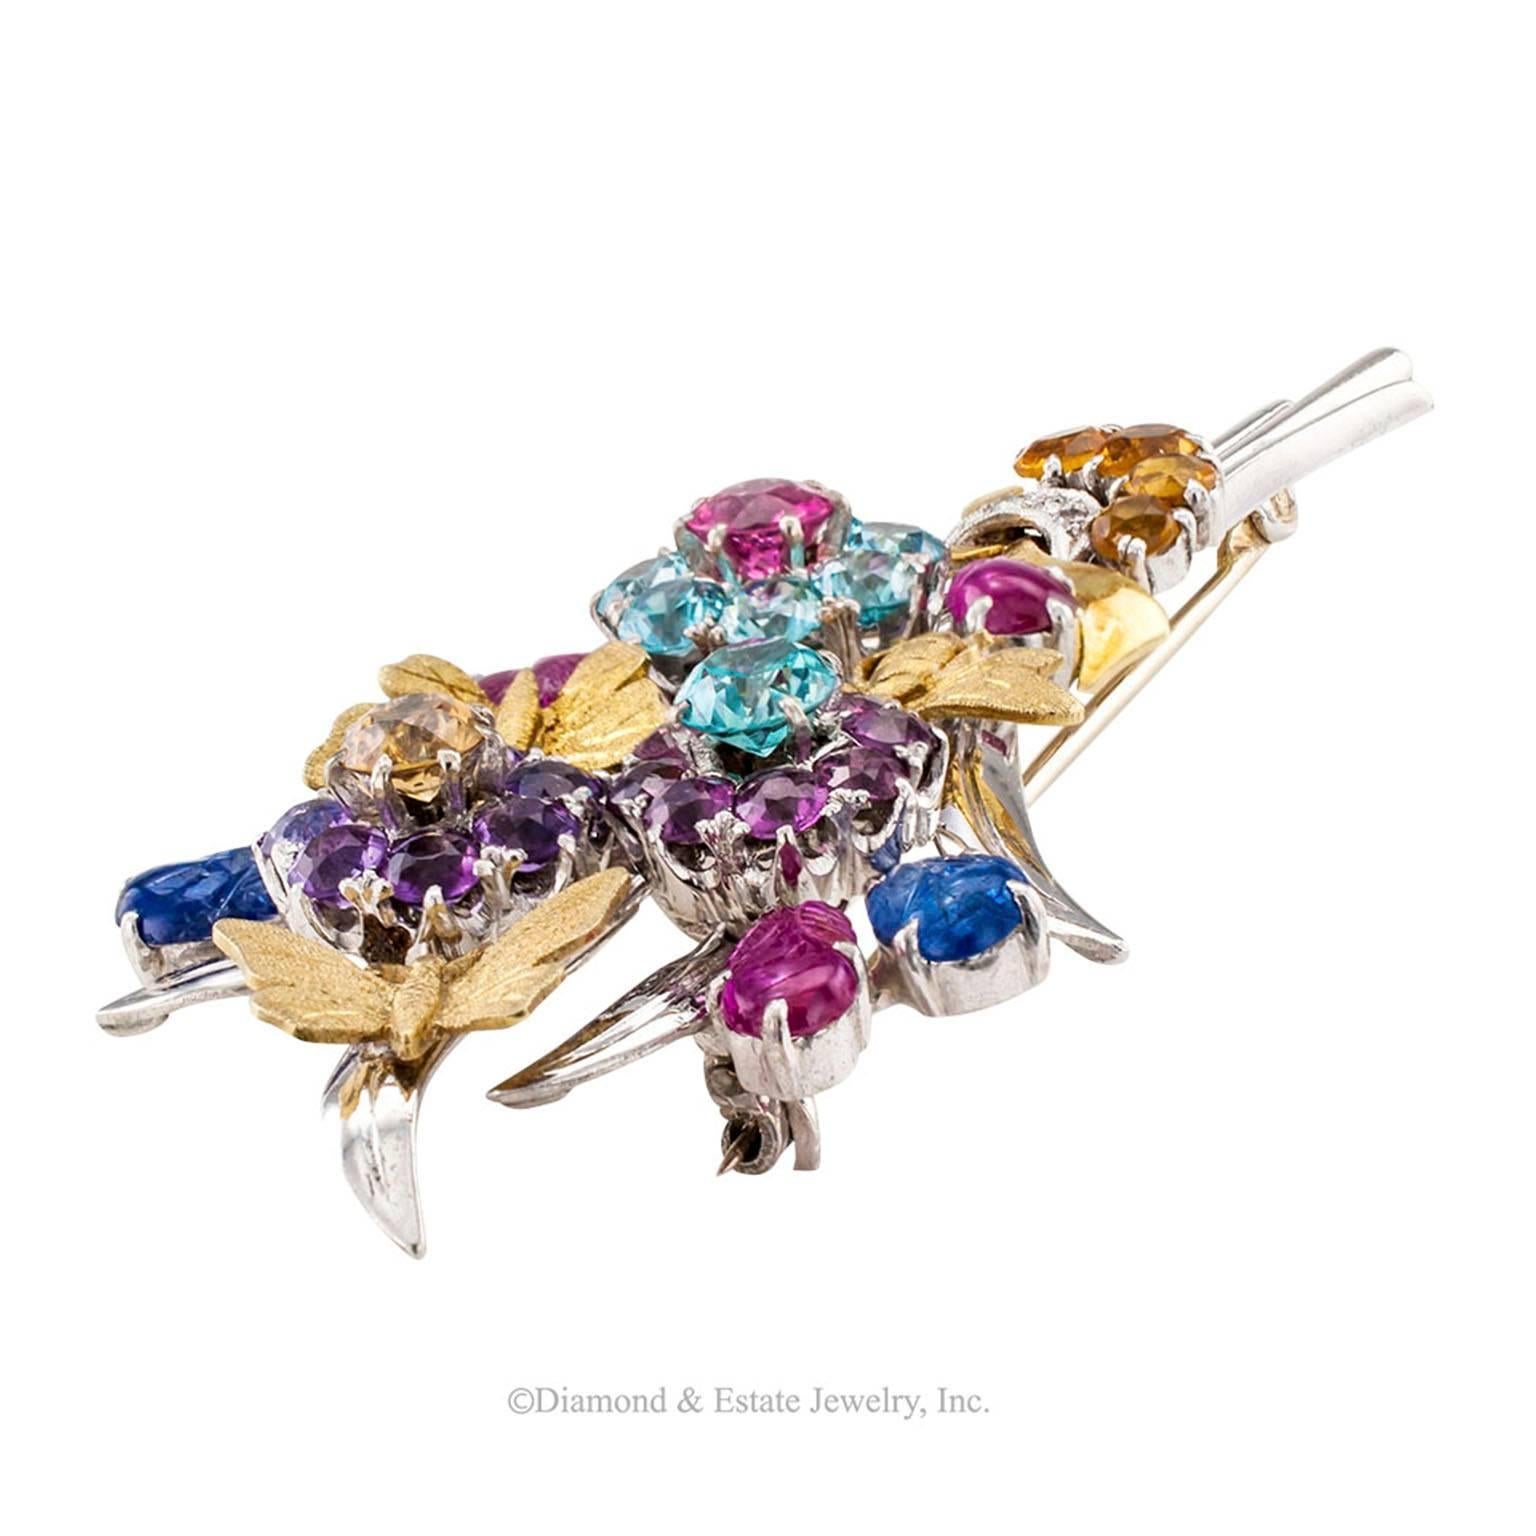 Retro 1940s Gemstone Gold Flower Bouquet Brooch

Retro gemstone flower bouquet and two-tone 14-karat gold brooch circa 1940.  Gathered with a ribbon of diamonds and a gold bow these fanciful and magnificent flowers are composed by amethyst,